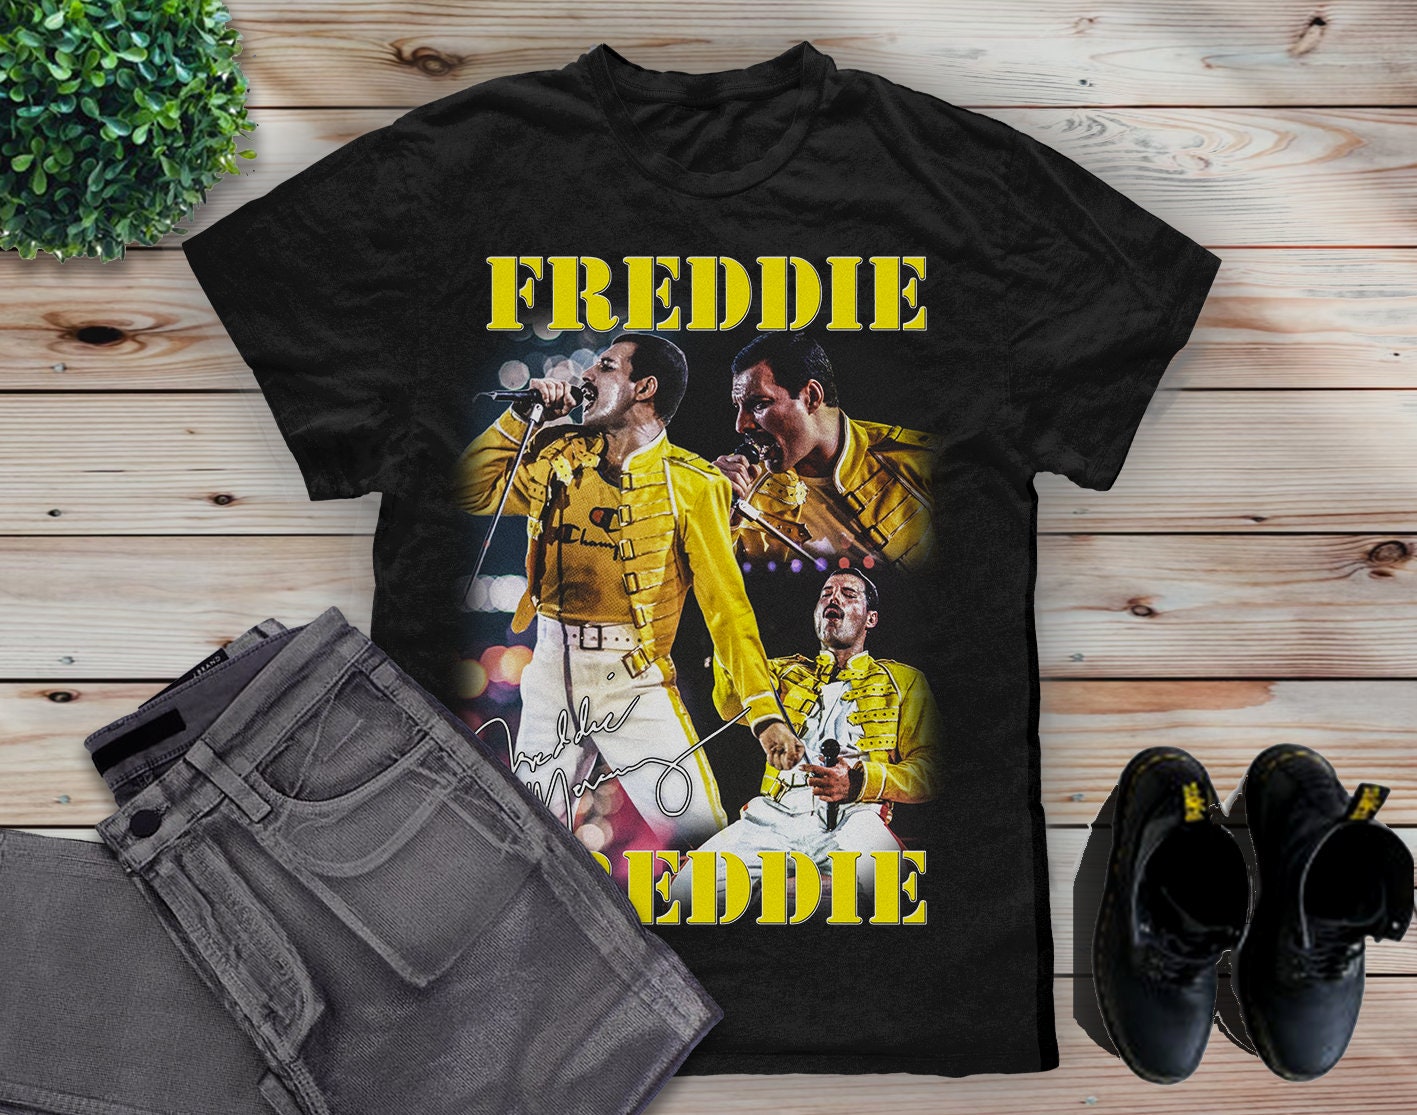 Discover Maglietta T-Shirt Freddie Mercury Rock And Roll Uomo Donna Bambini Vintage Queen